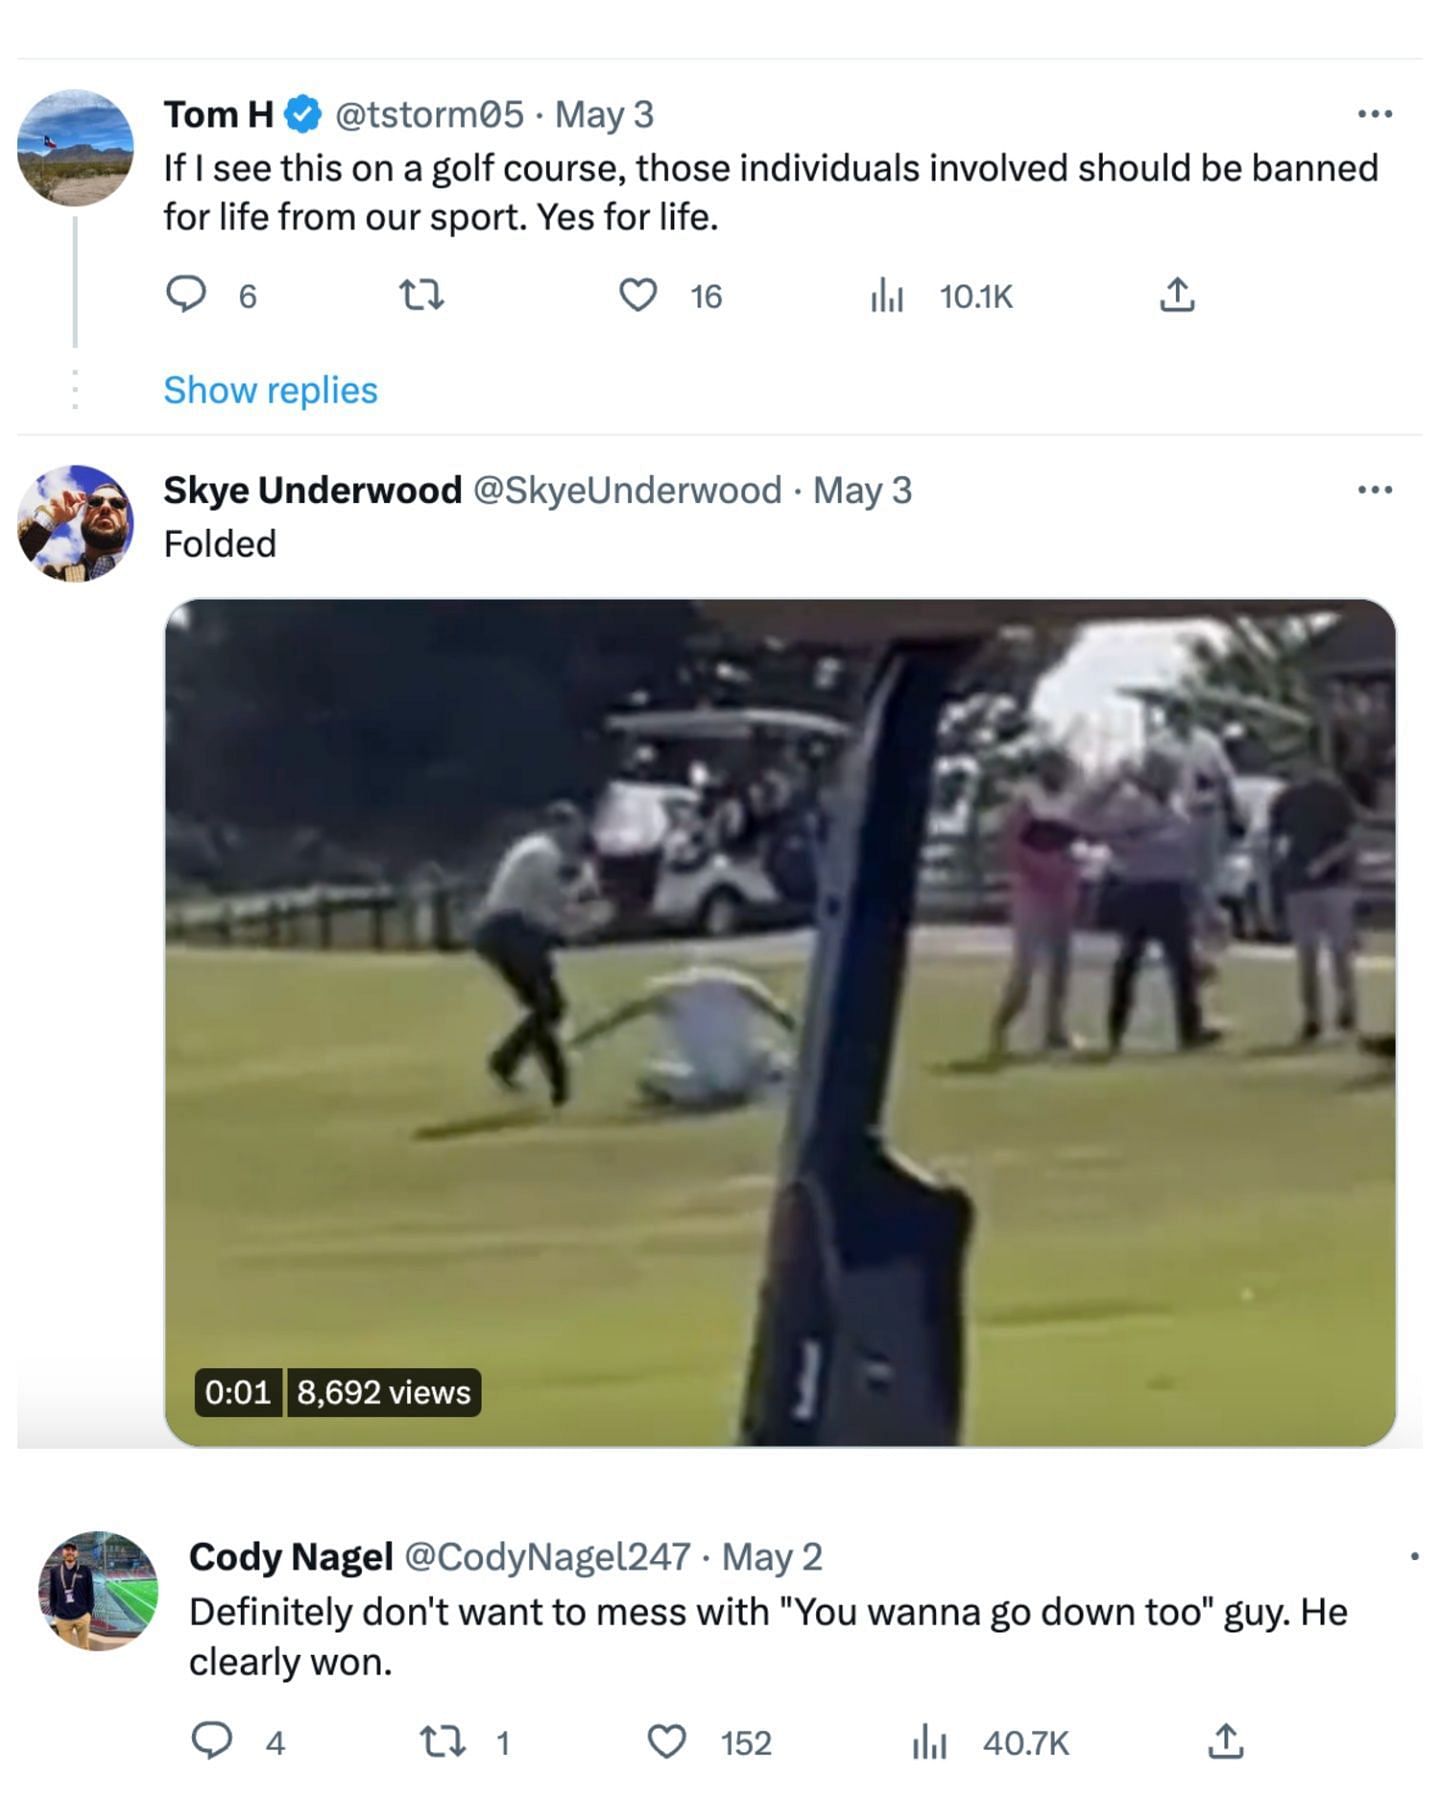 Video from the golf course stuns social media users as netizens were shocked to see the alleged altercation between former MMA fighters and civilians. (Image via Twitter)